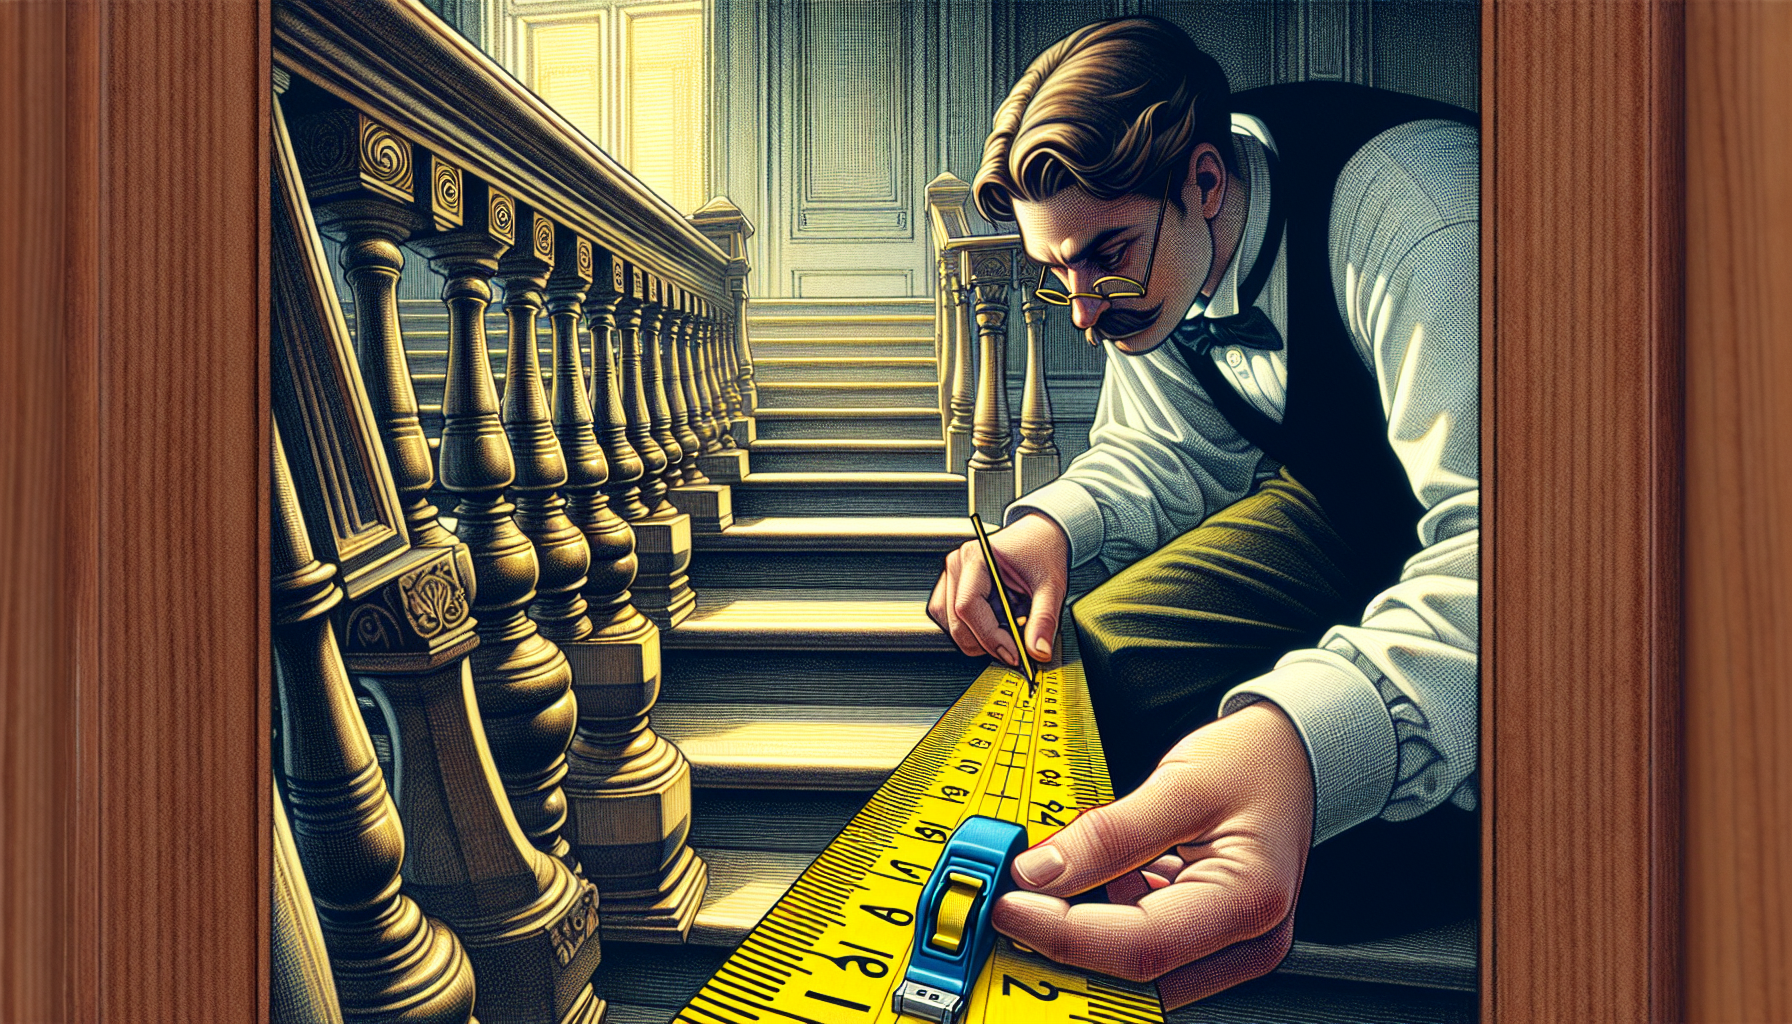 Illustration of a person using a measuring tape on a staircase